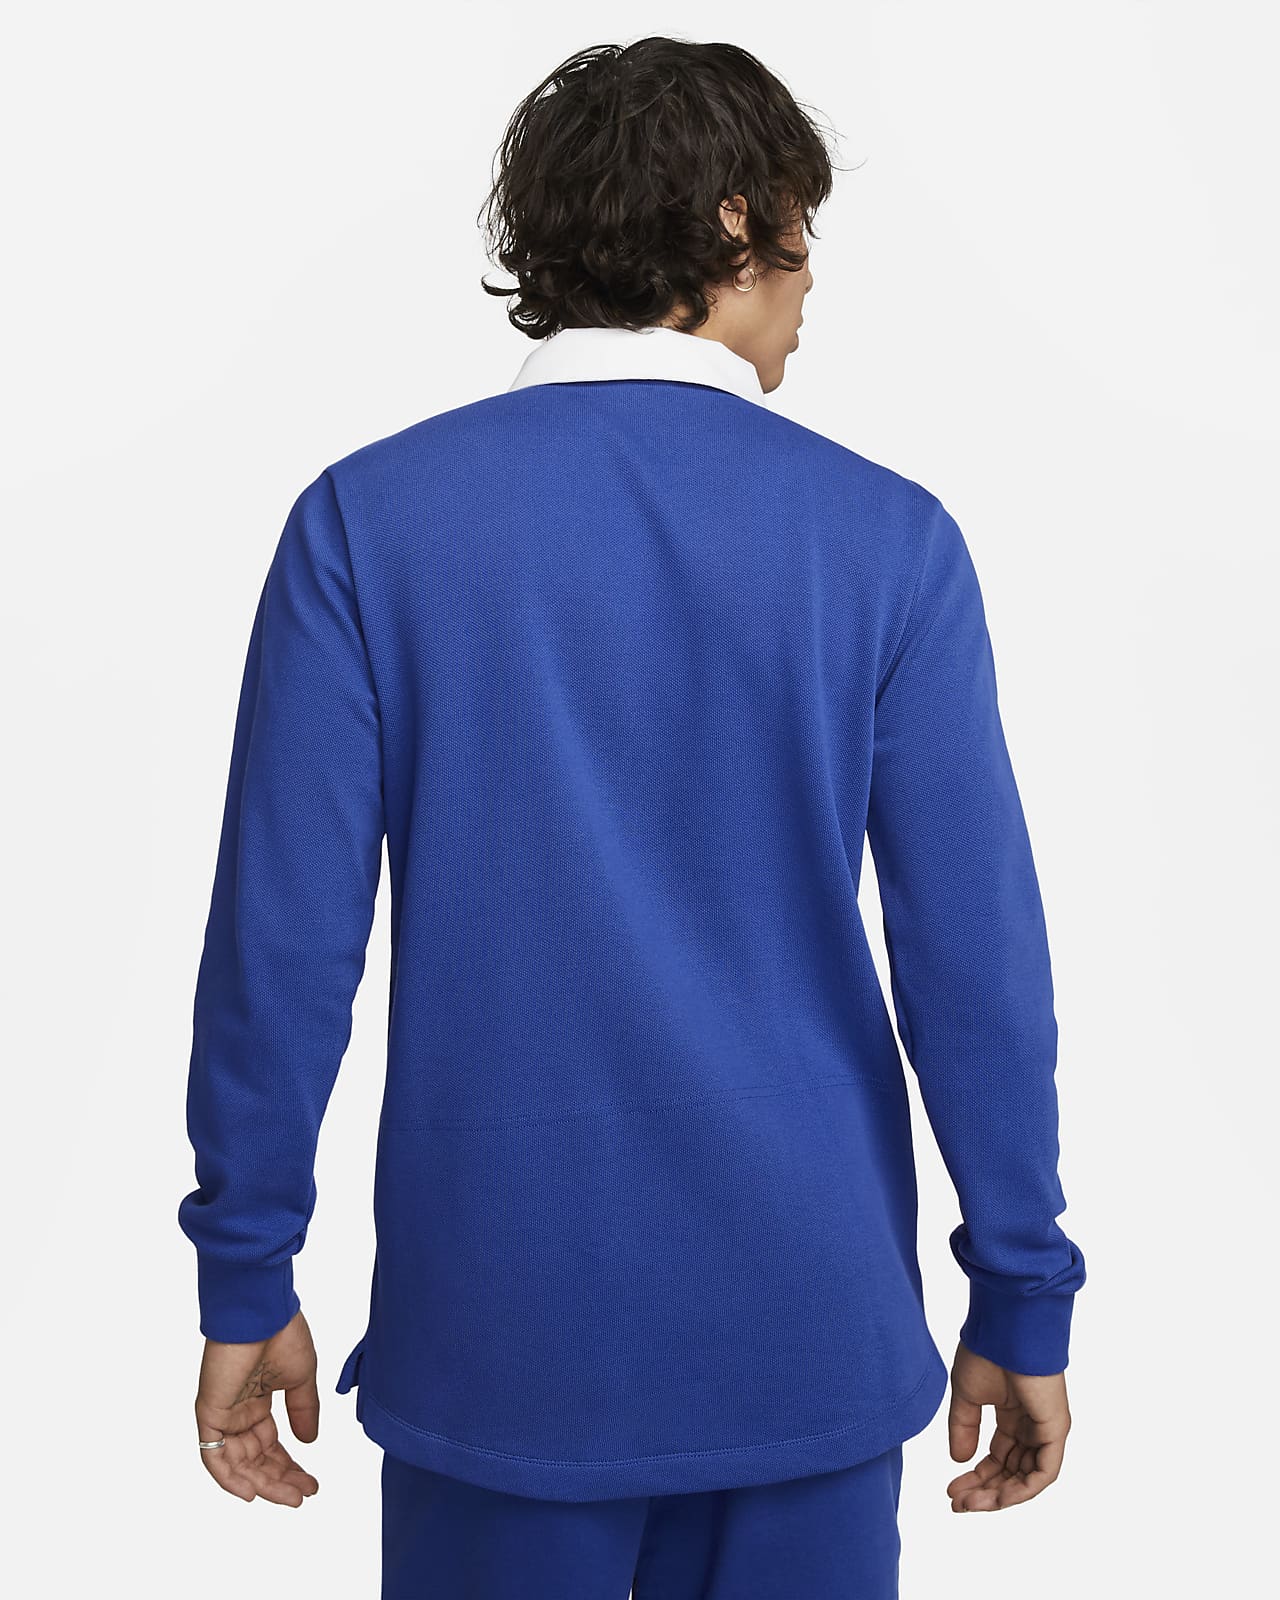 Men's Long Sleeve Polo, Men's Rugby Shirts